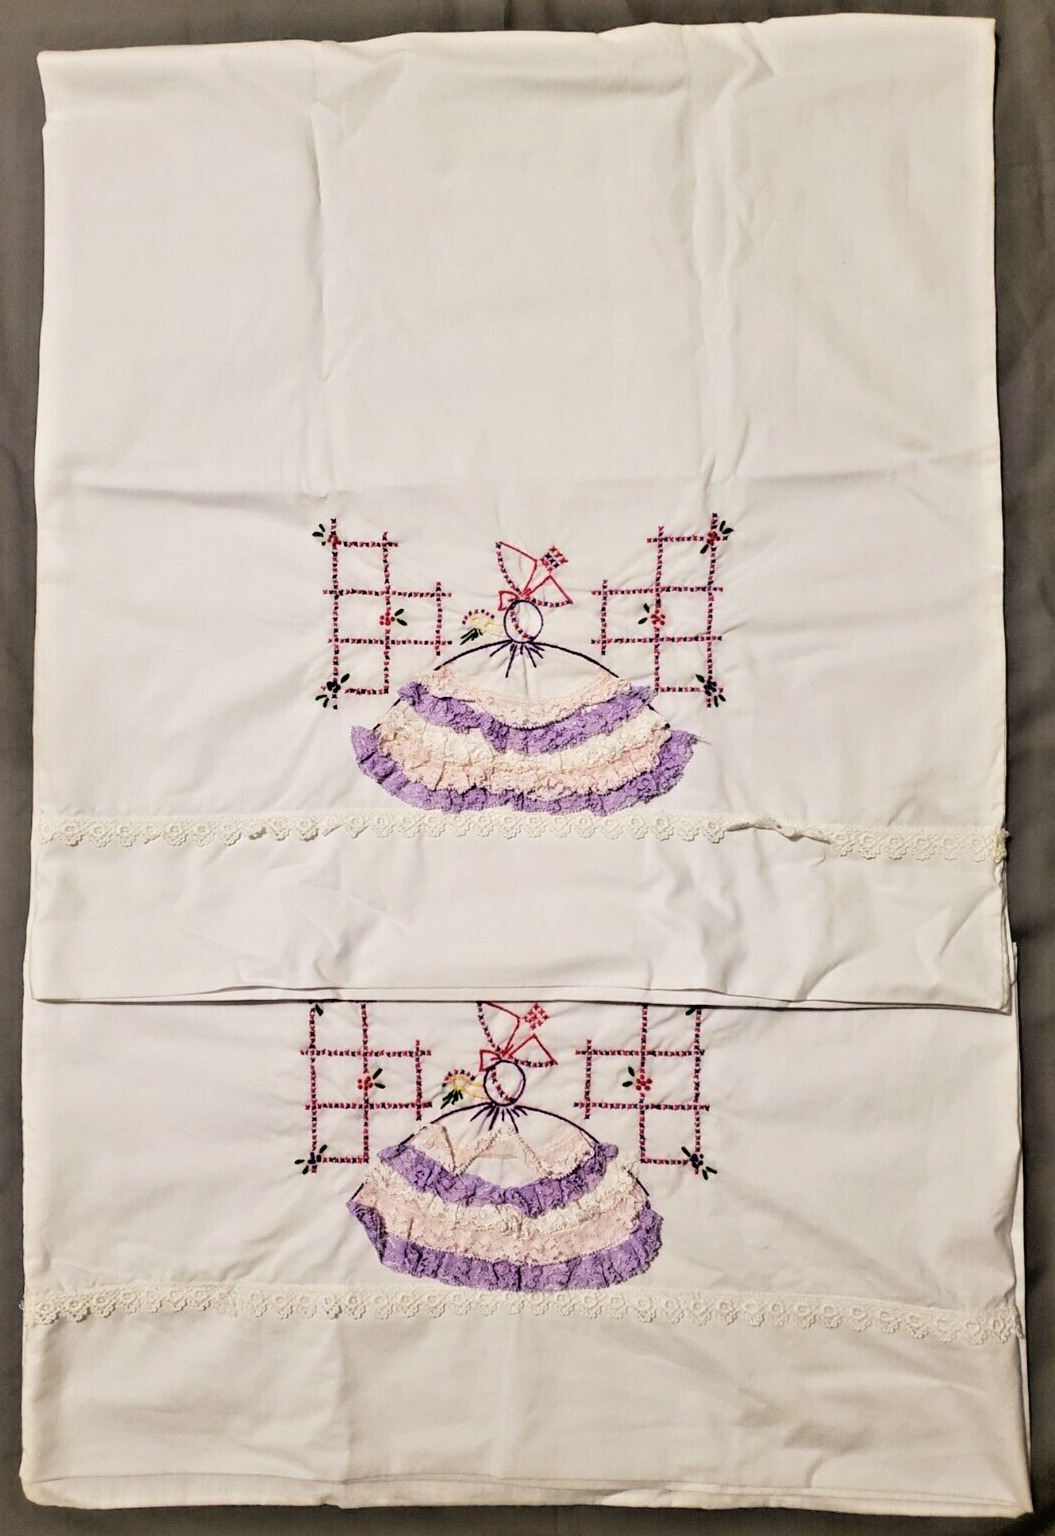 Pair Pillow Cases Vintage Cross Stitch Embroidery Girl In Hat Bedding Sheets